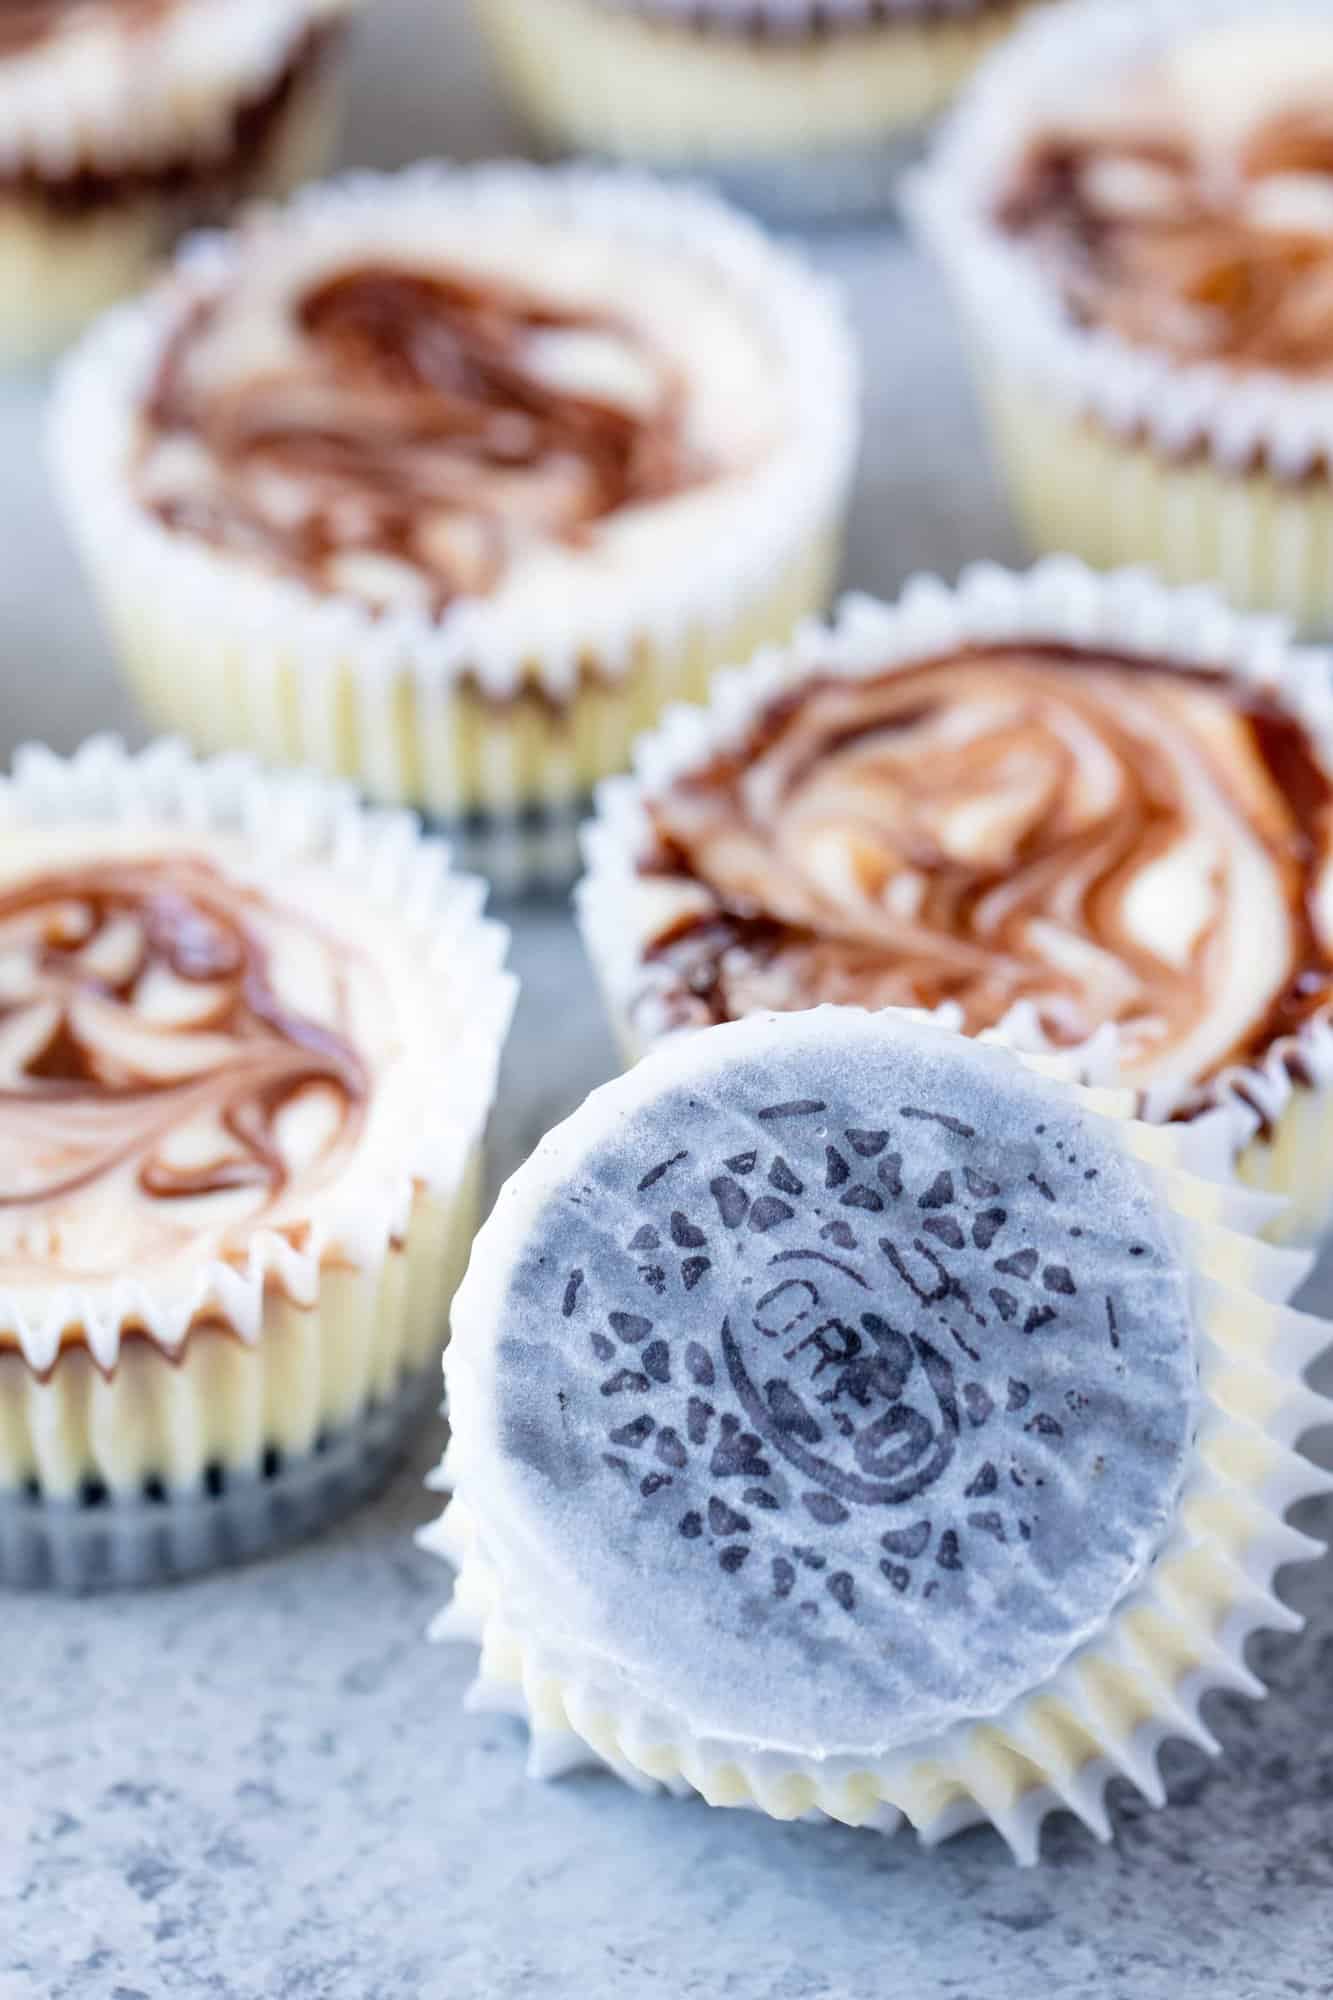 Fudge Swirled Oreo Bottom Cheesecake Cupcakes are a delicious twist on your standard cupcake. It's a fudge swirled mini cheesecake that sits on top of an Oreo cookie. What's not to love?